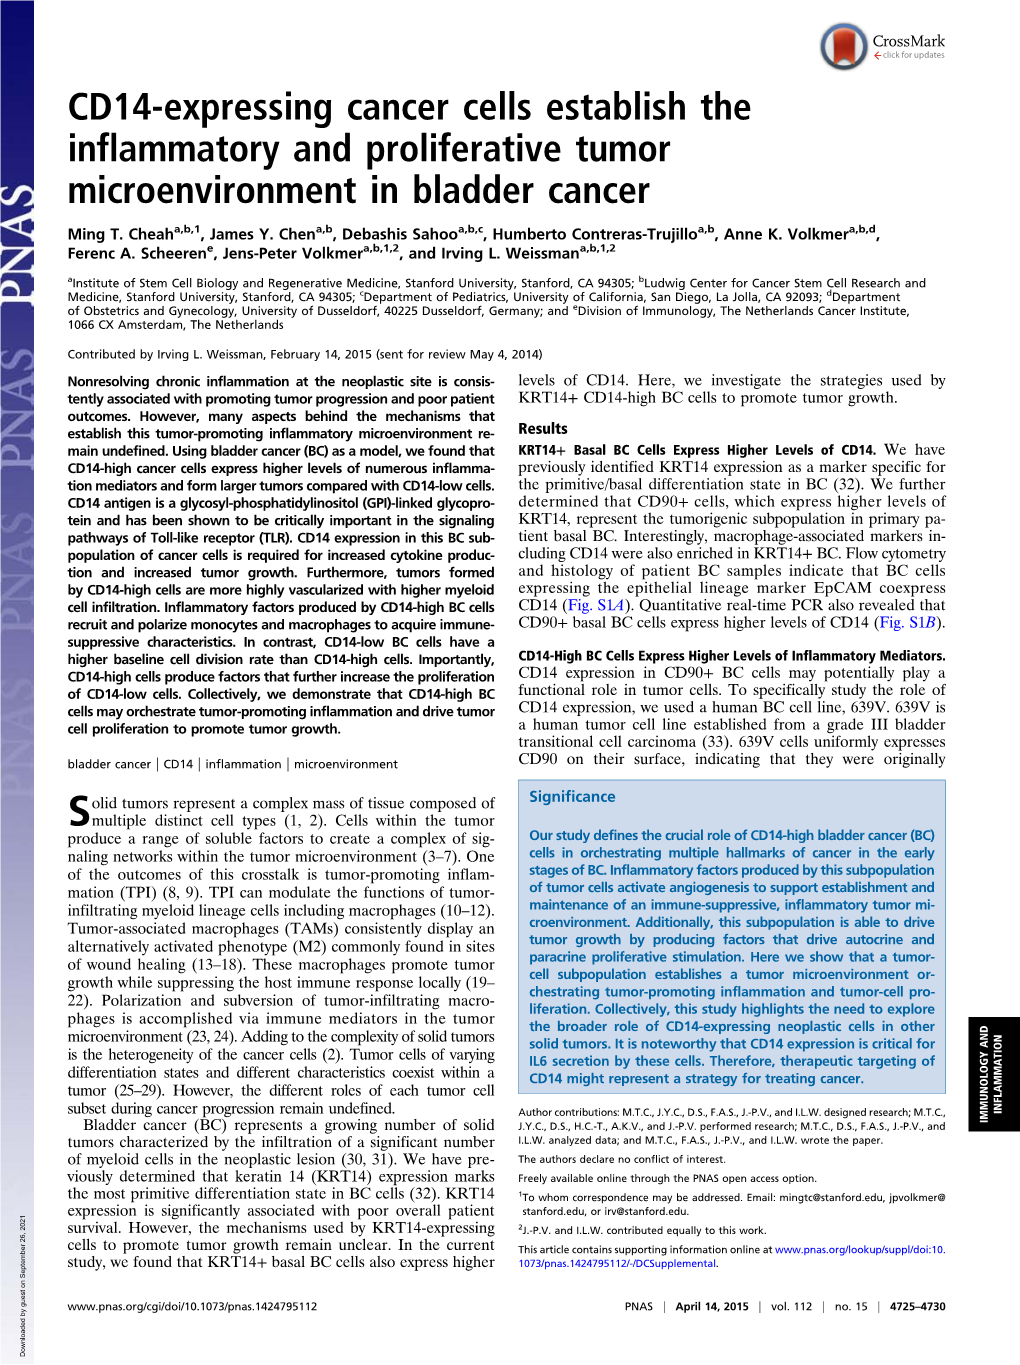 CD14-Expressing Cancer Cells Establish the Inflammatory and Proliferative Tumor Microenvironment in Bladder Cancer